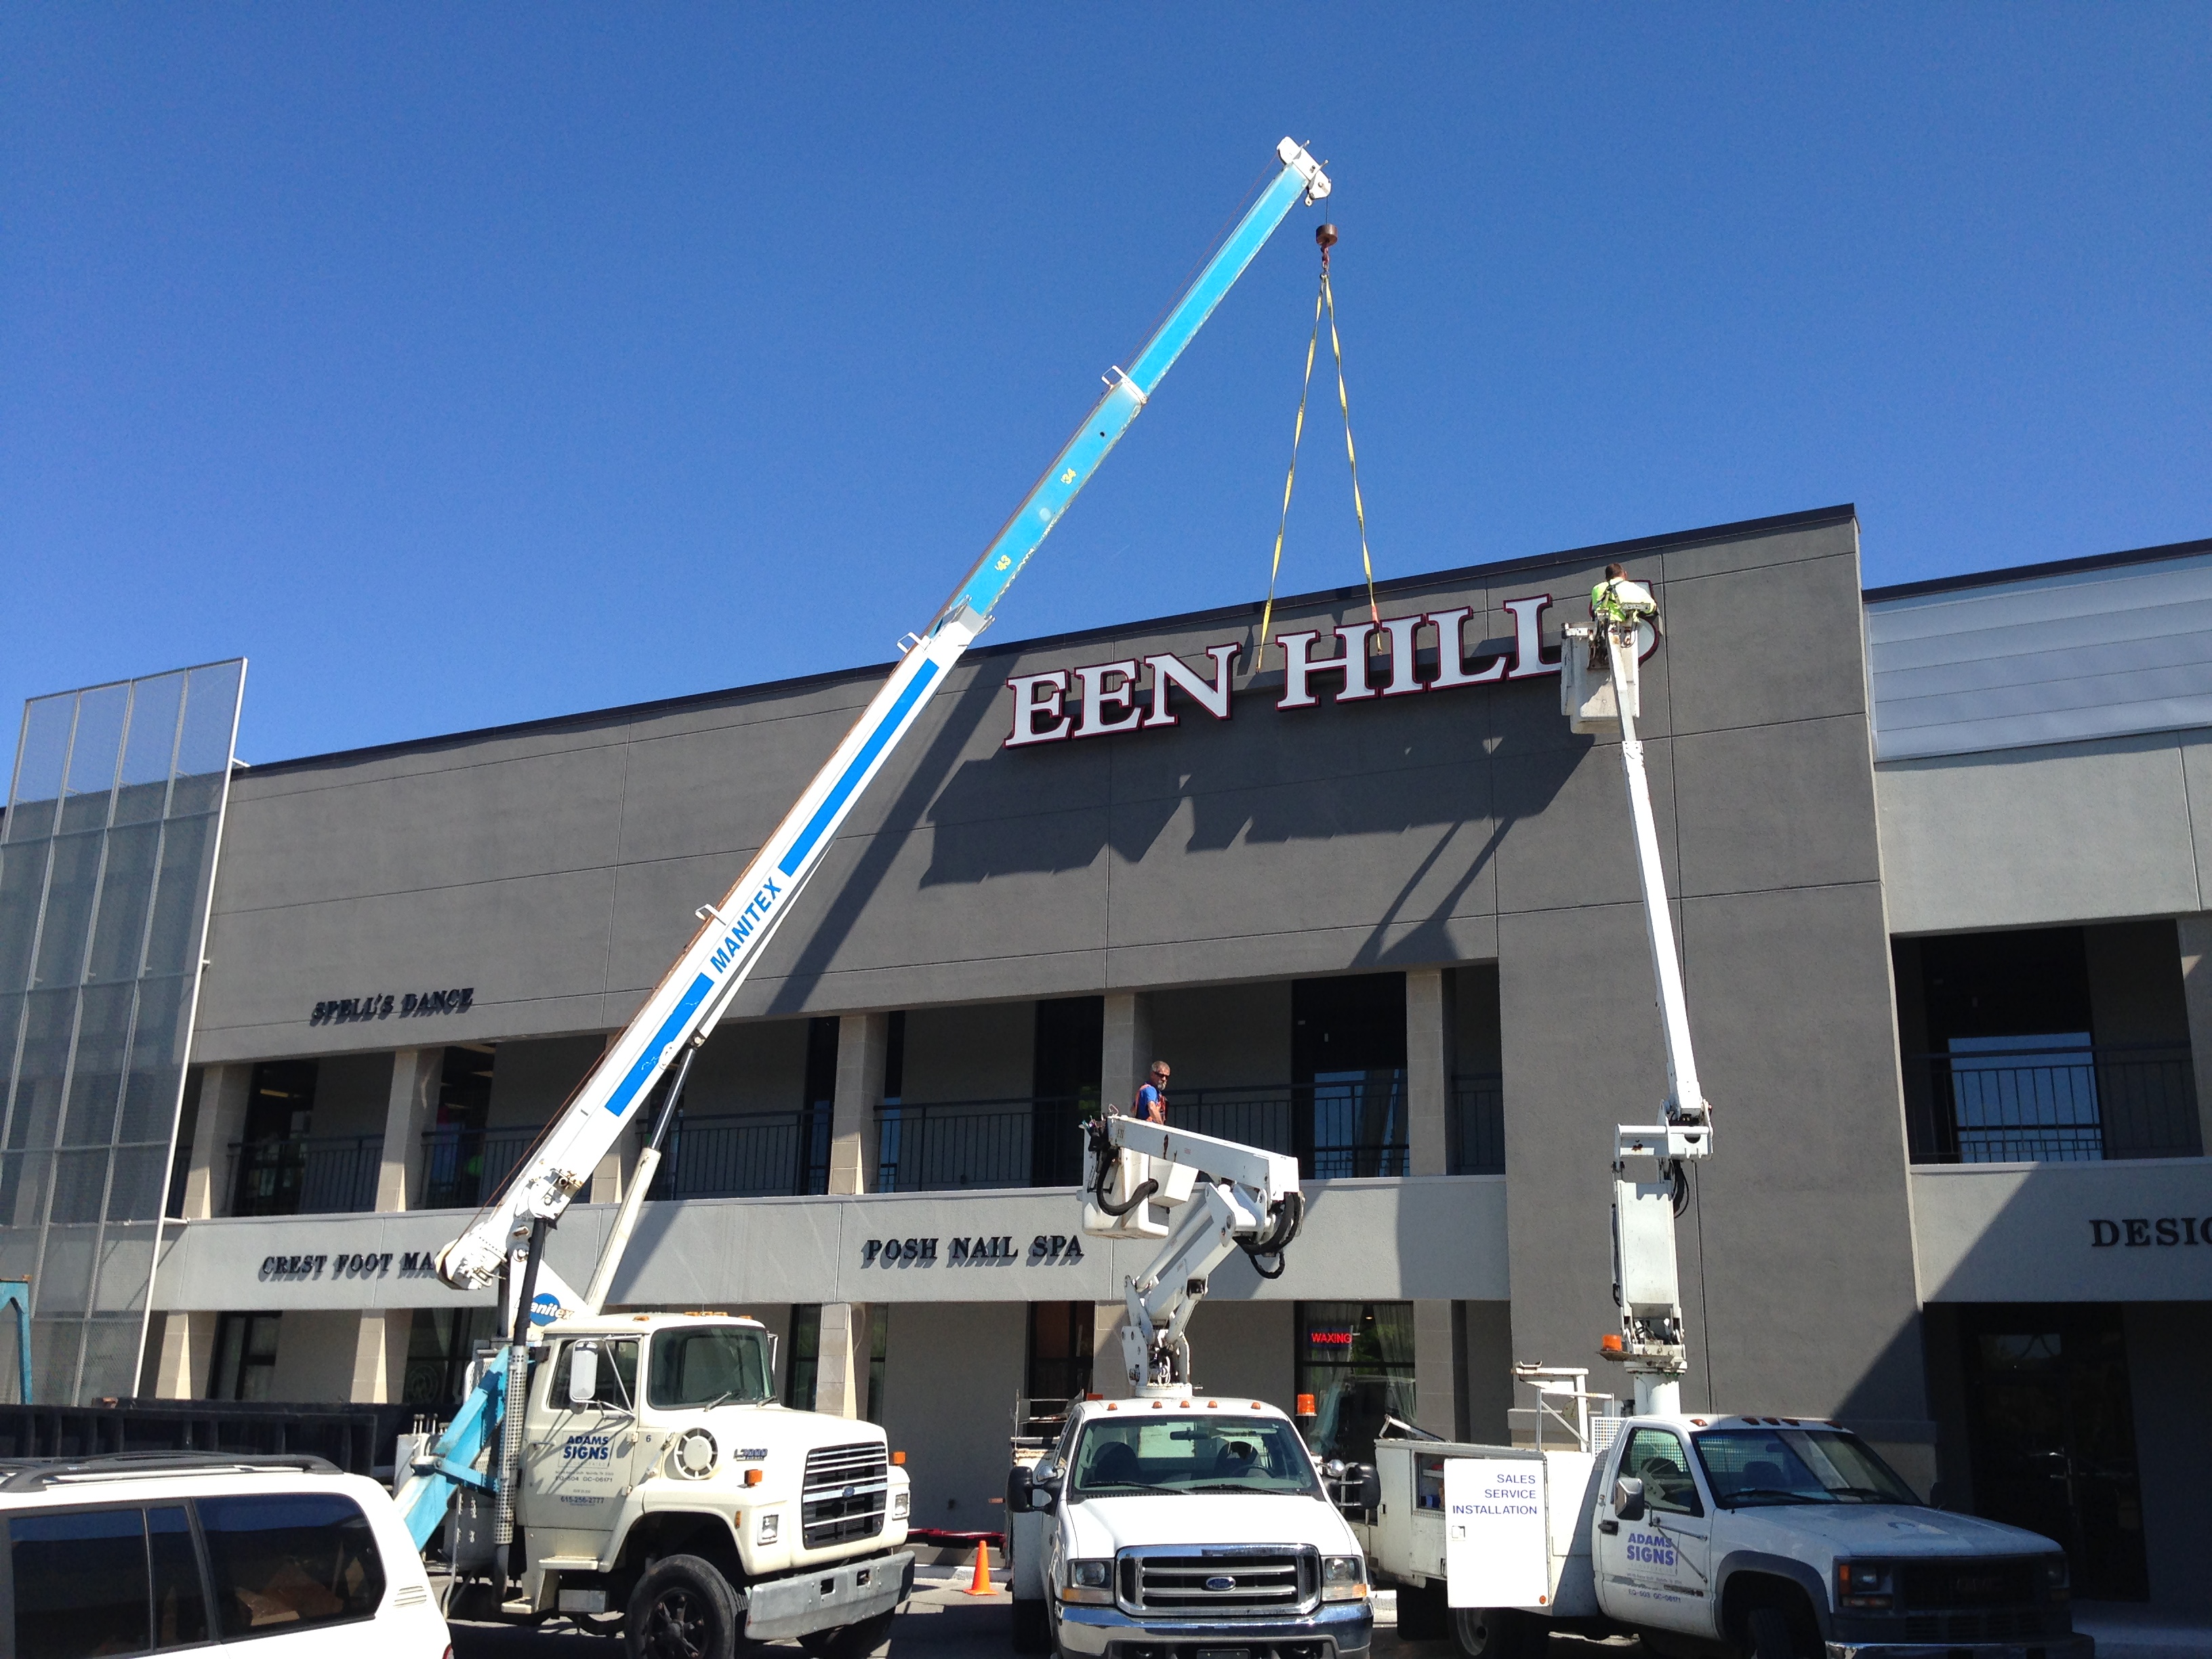 Gallery At Green Hills installation in progress by Adams Signs & Awnings